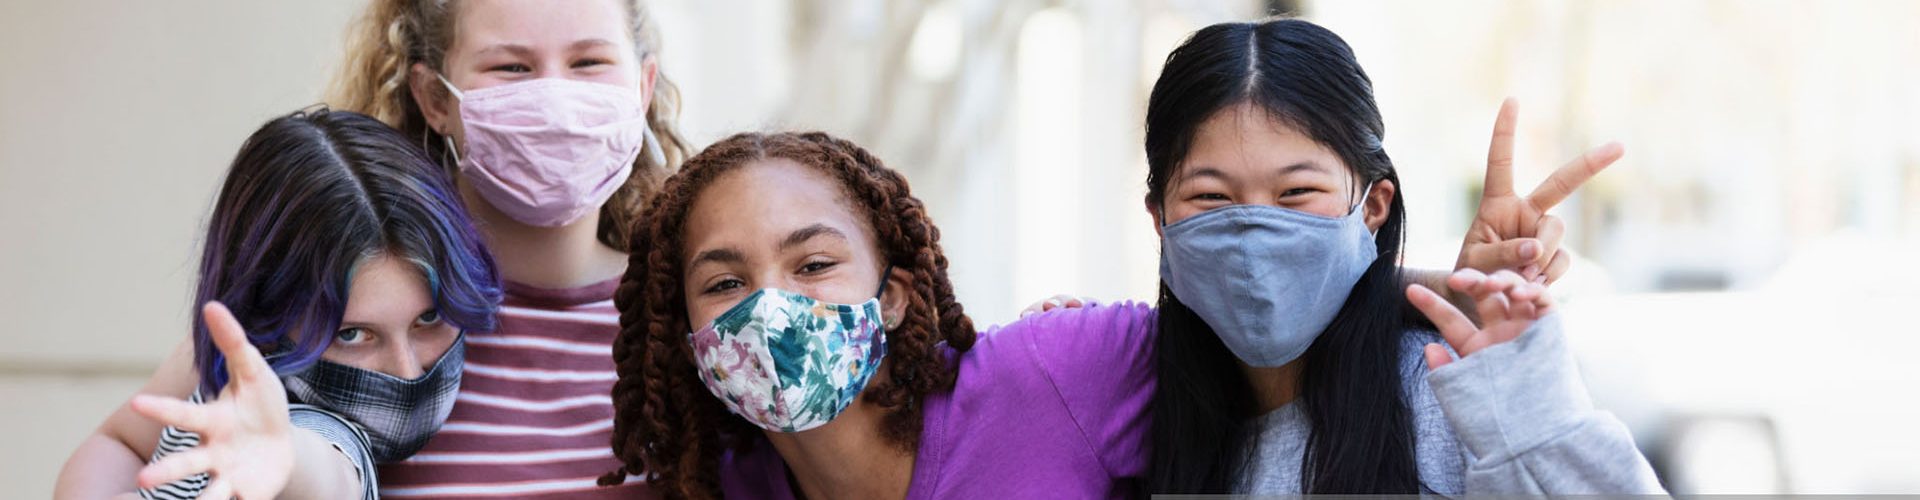 A multi-ethnic group of four tween girls, 12 and 13 years old, standing together on a sidewalk outside a building. They are wearing protective face masks during the COVID-19 pandemic, trying to prevent the spread of coronavirus. They are looking at the camera, smiling behind their masks.